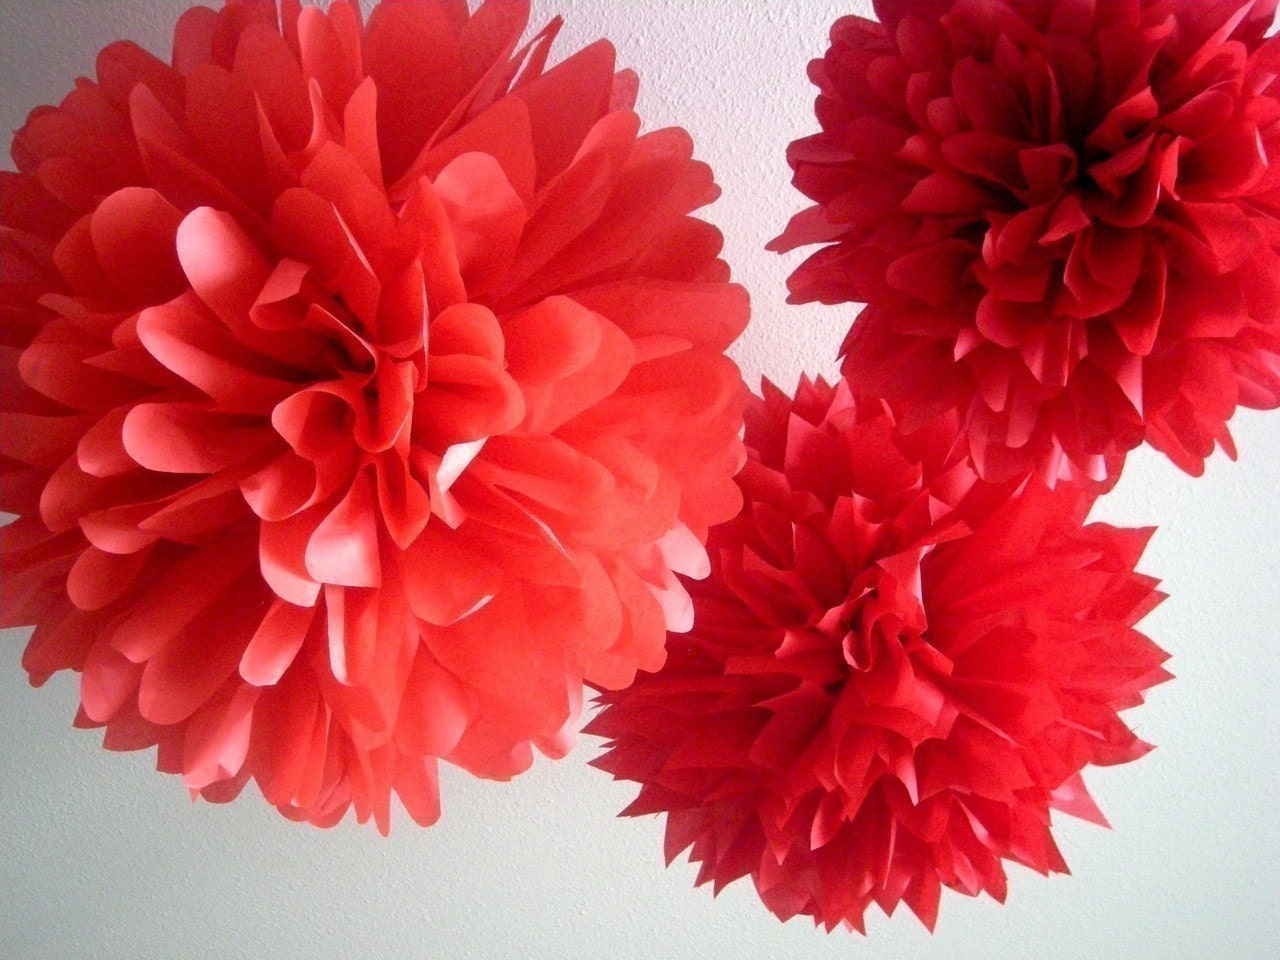 Red Riding Hood ... 3 tissue paper poms // wedding decorations // birthdays // holidays // eco party decorations